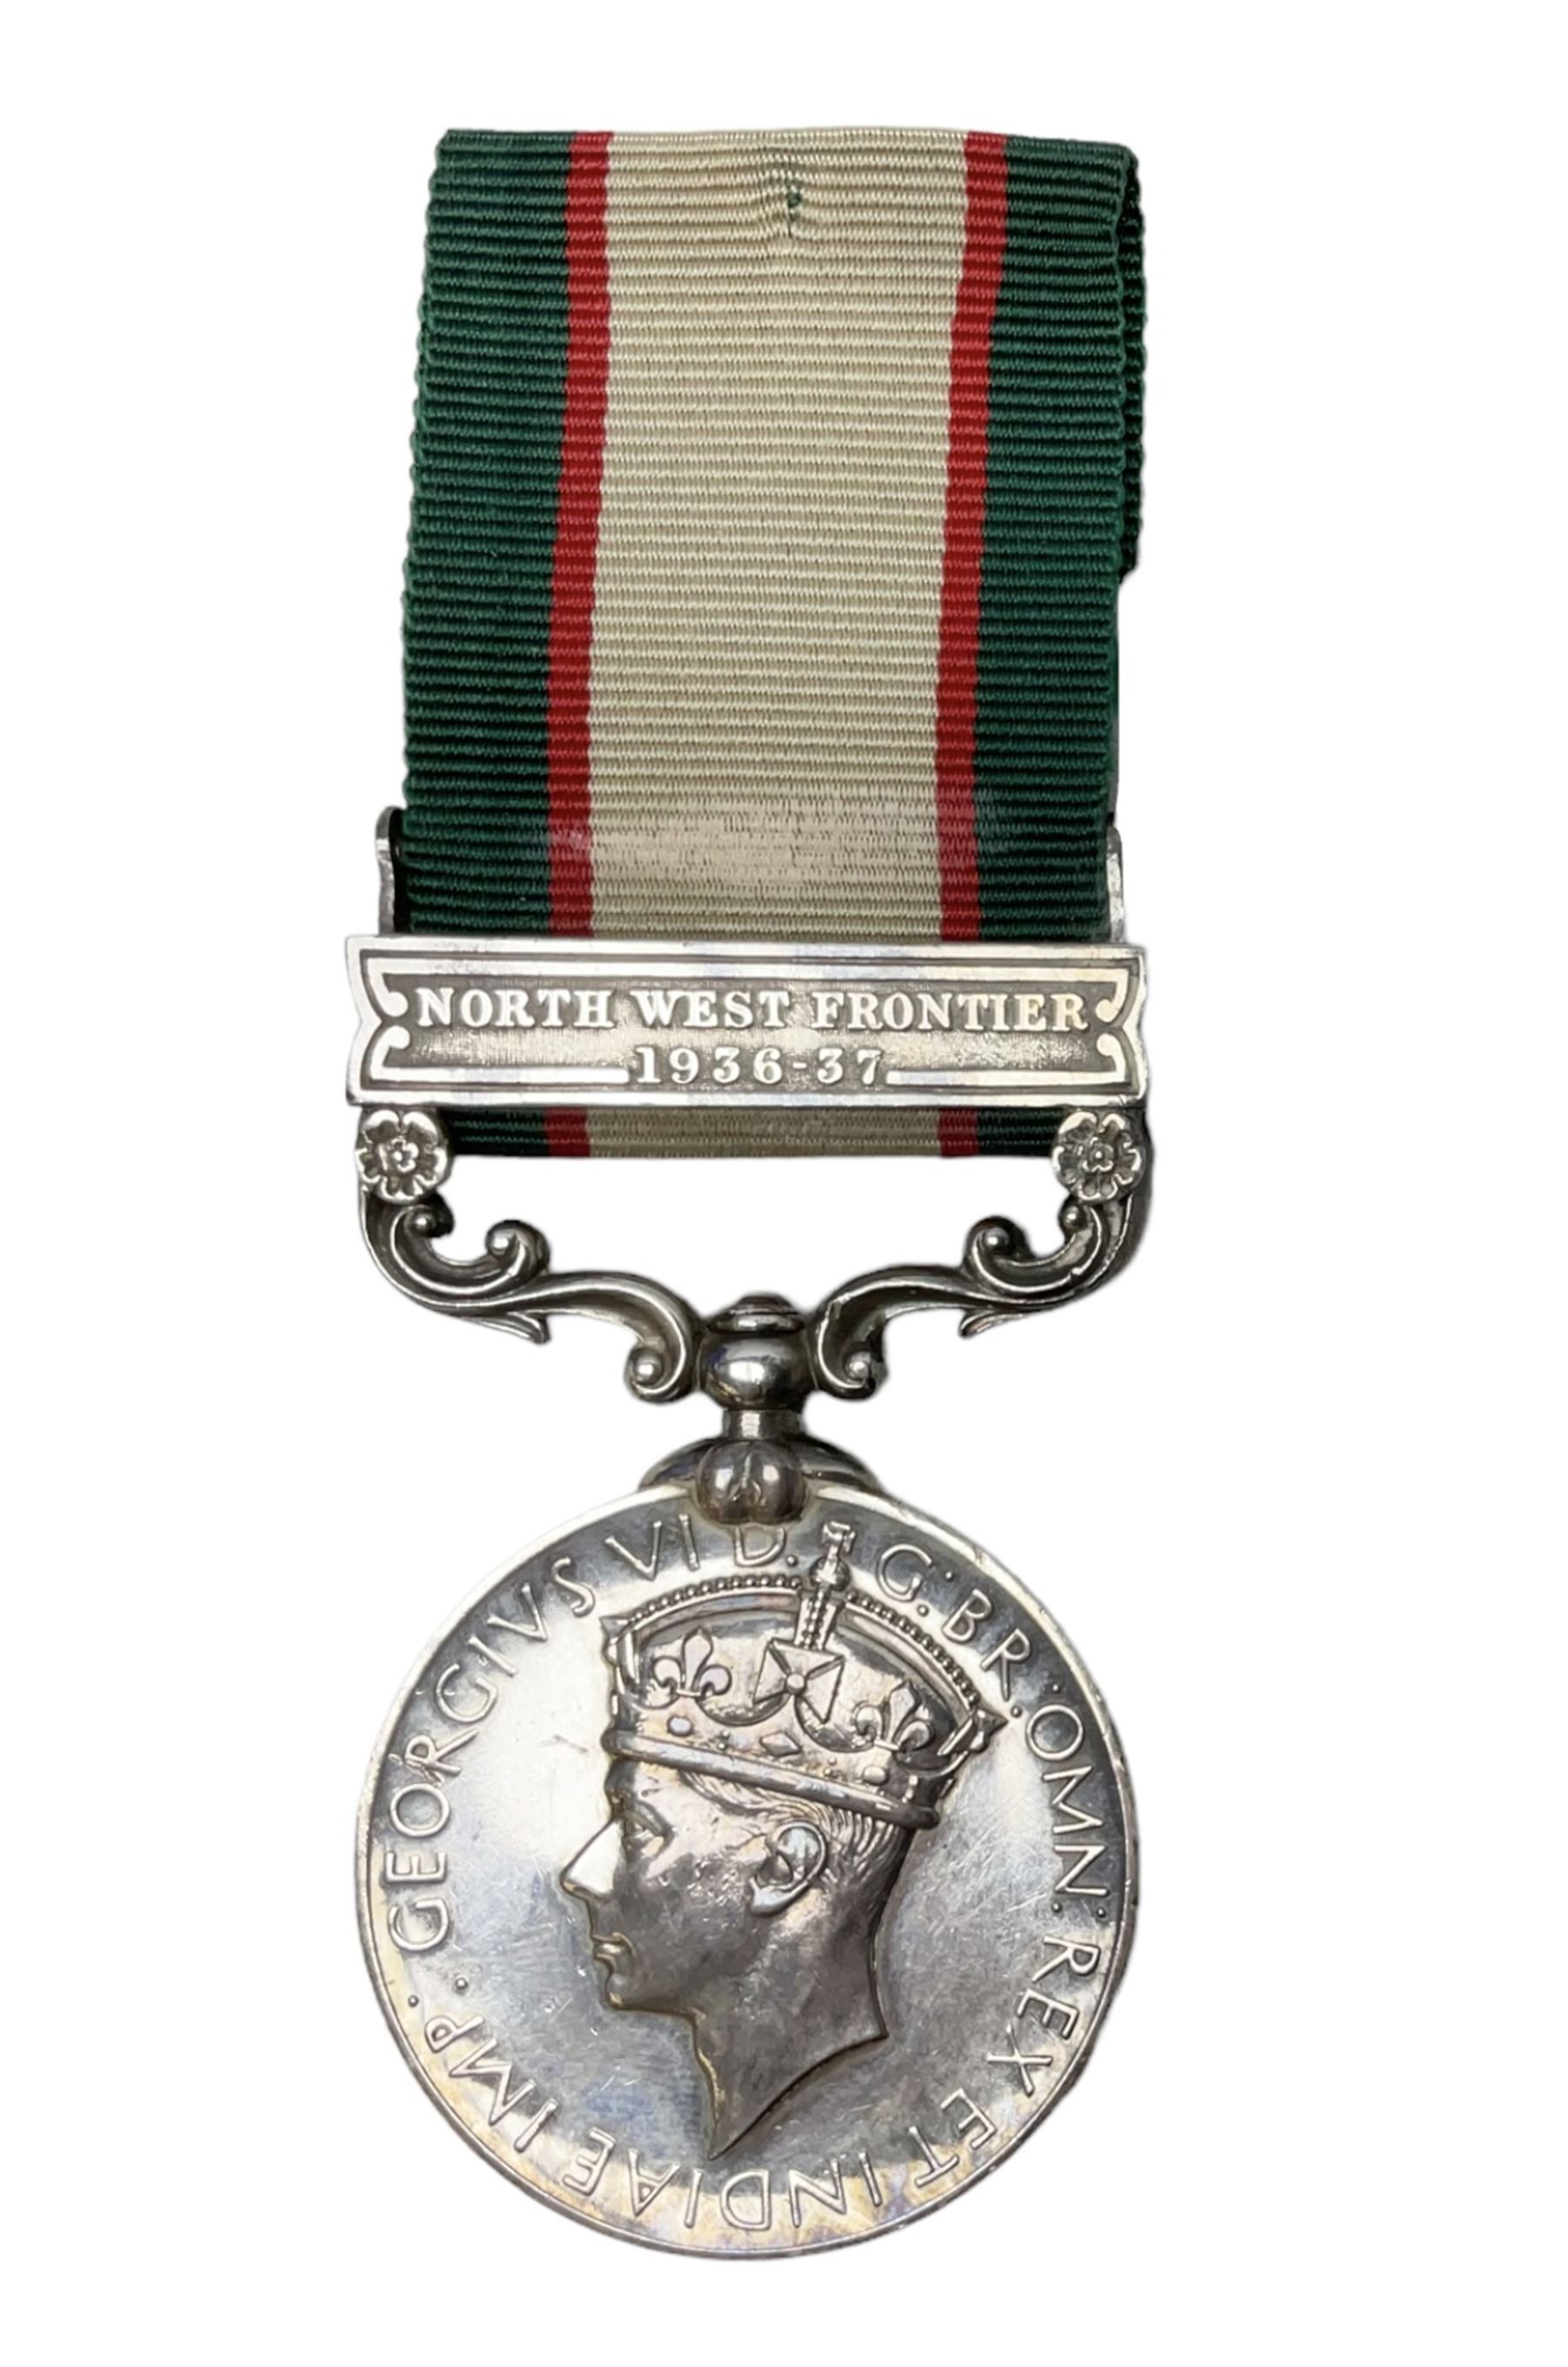 George VI India General Service Medal with North West Frontier 1936-37 clasp awarded to Bearer Khan